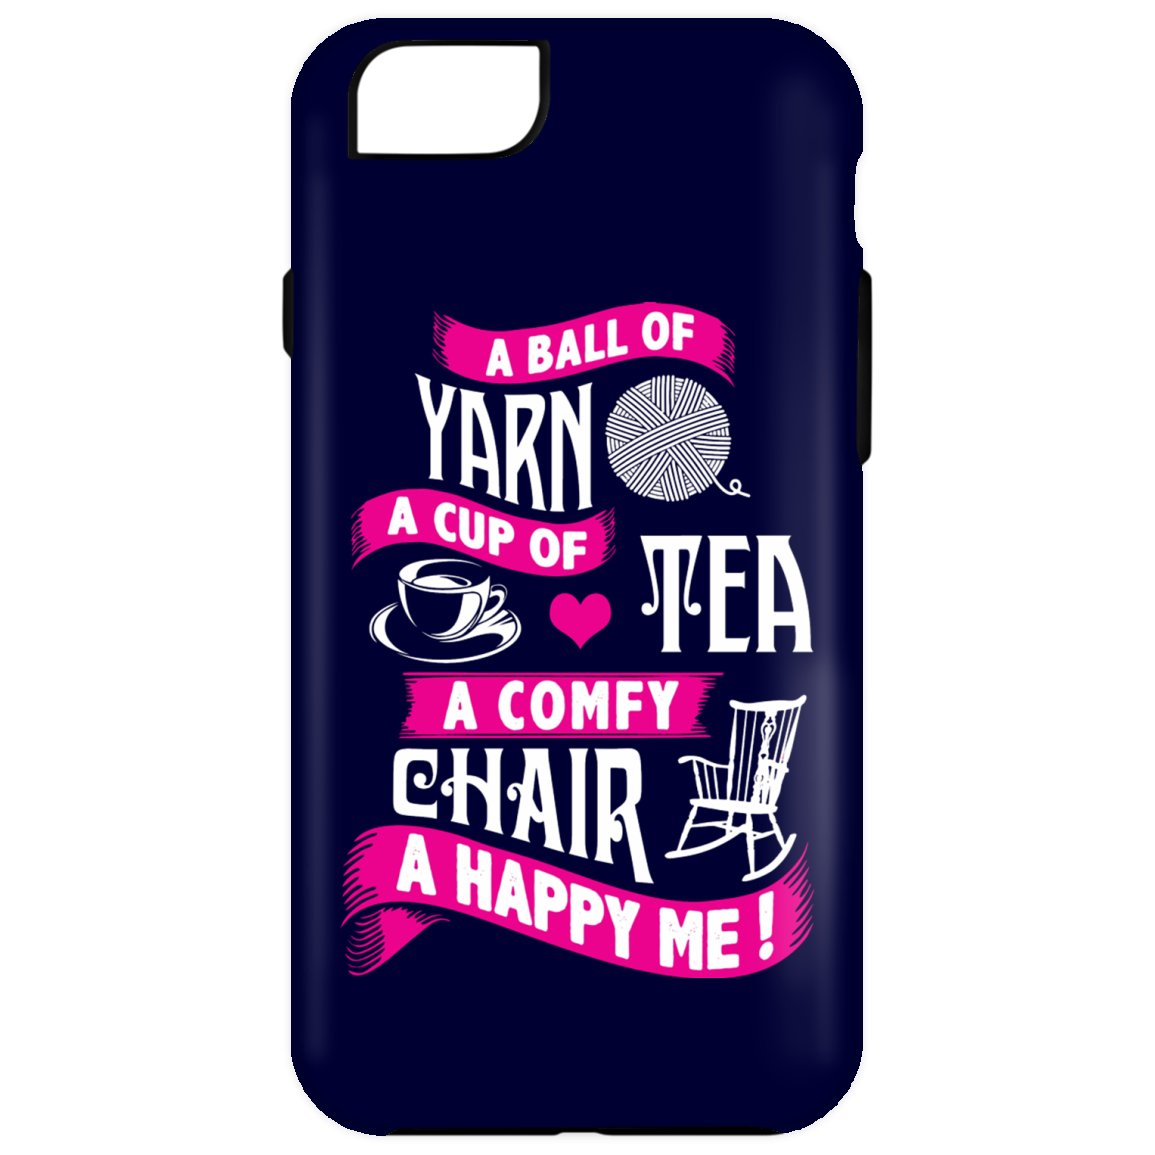 A Ball of Yarn iPhone Cases